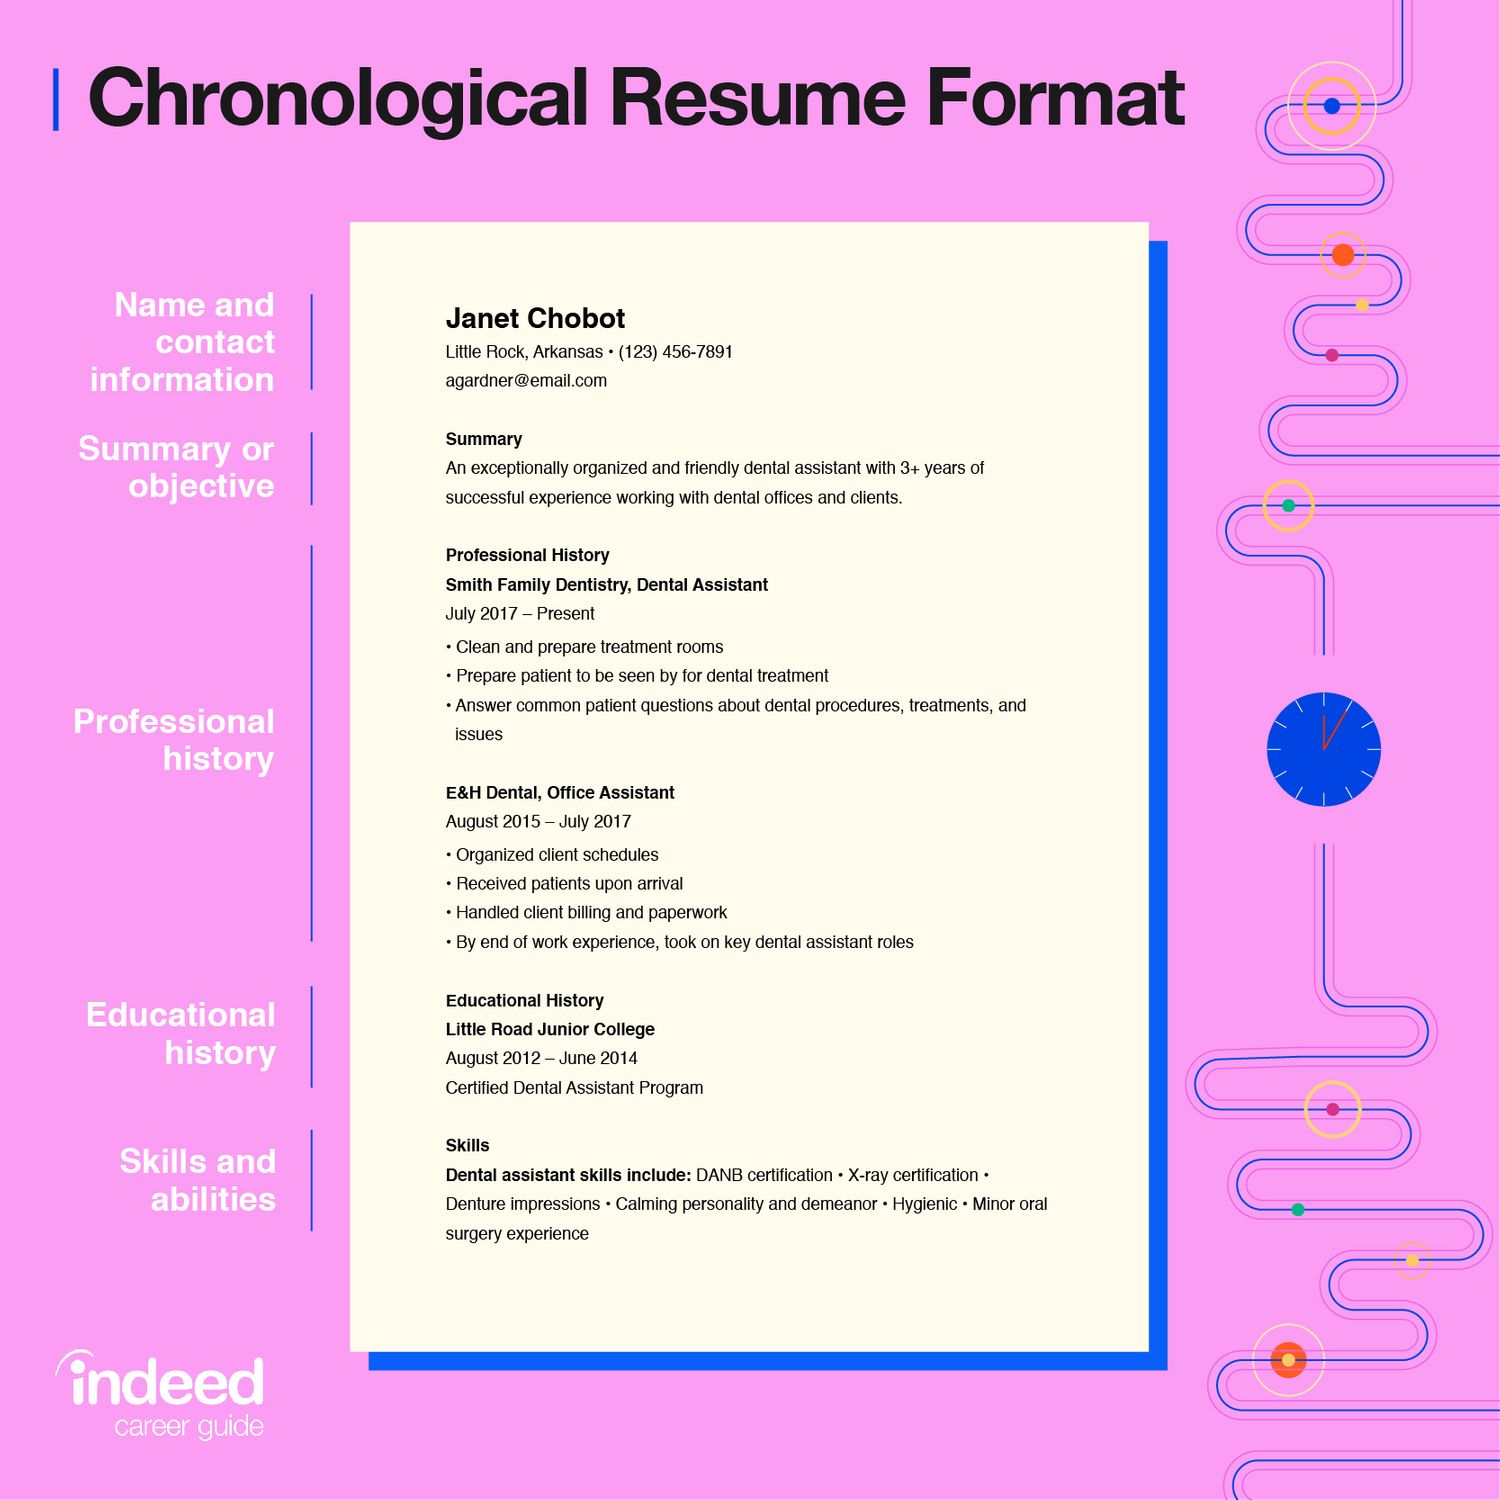 indeed resume writing services reddit